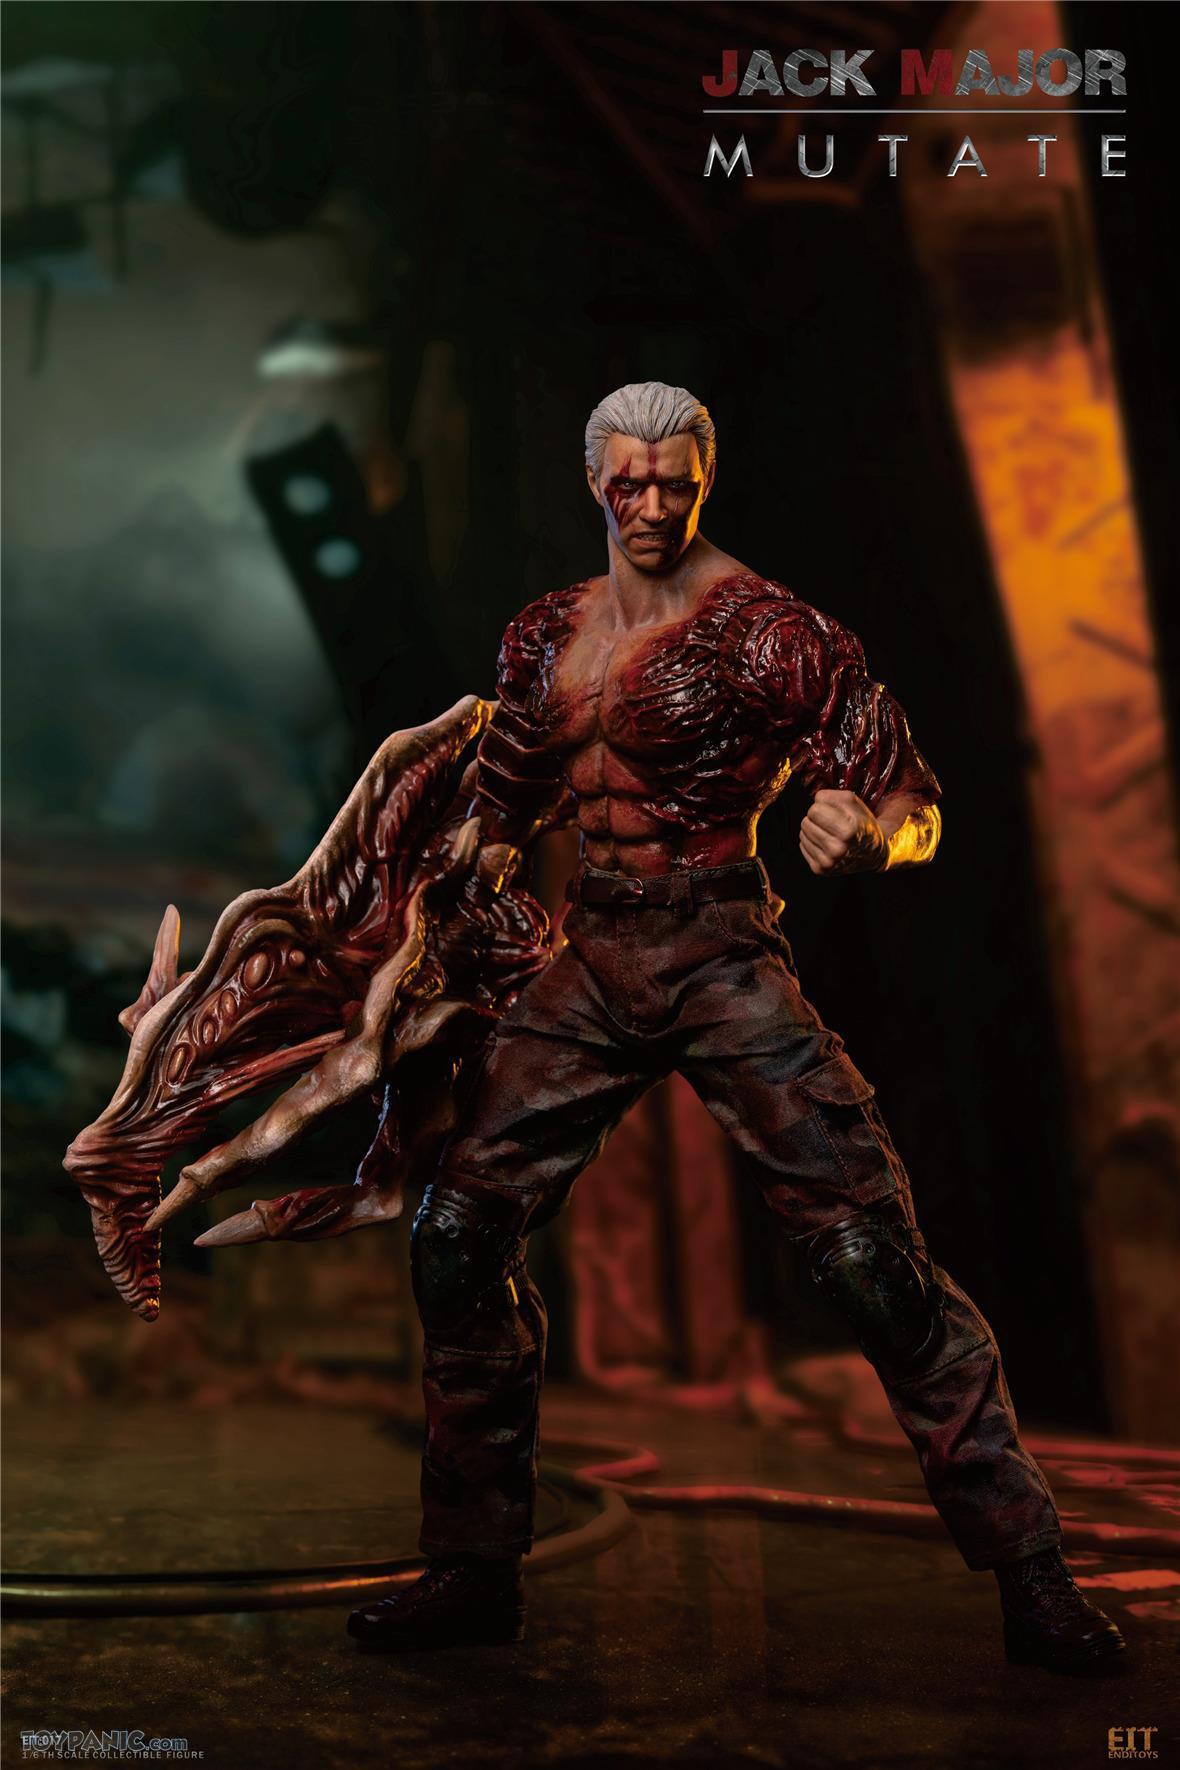 EndIToys - NEW PRODUCT:  1/6 Jack Major Mutate from End I Toys  2732024105950AM_6739850